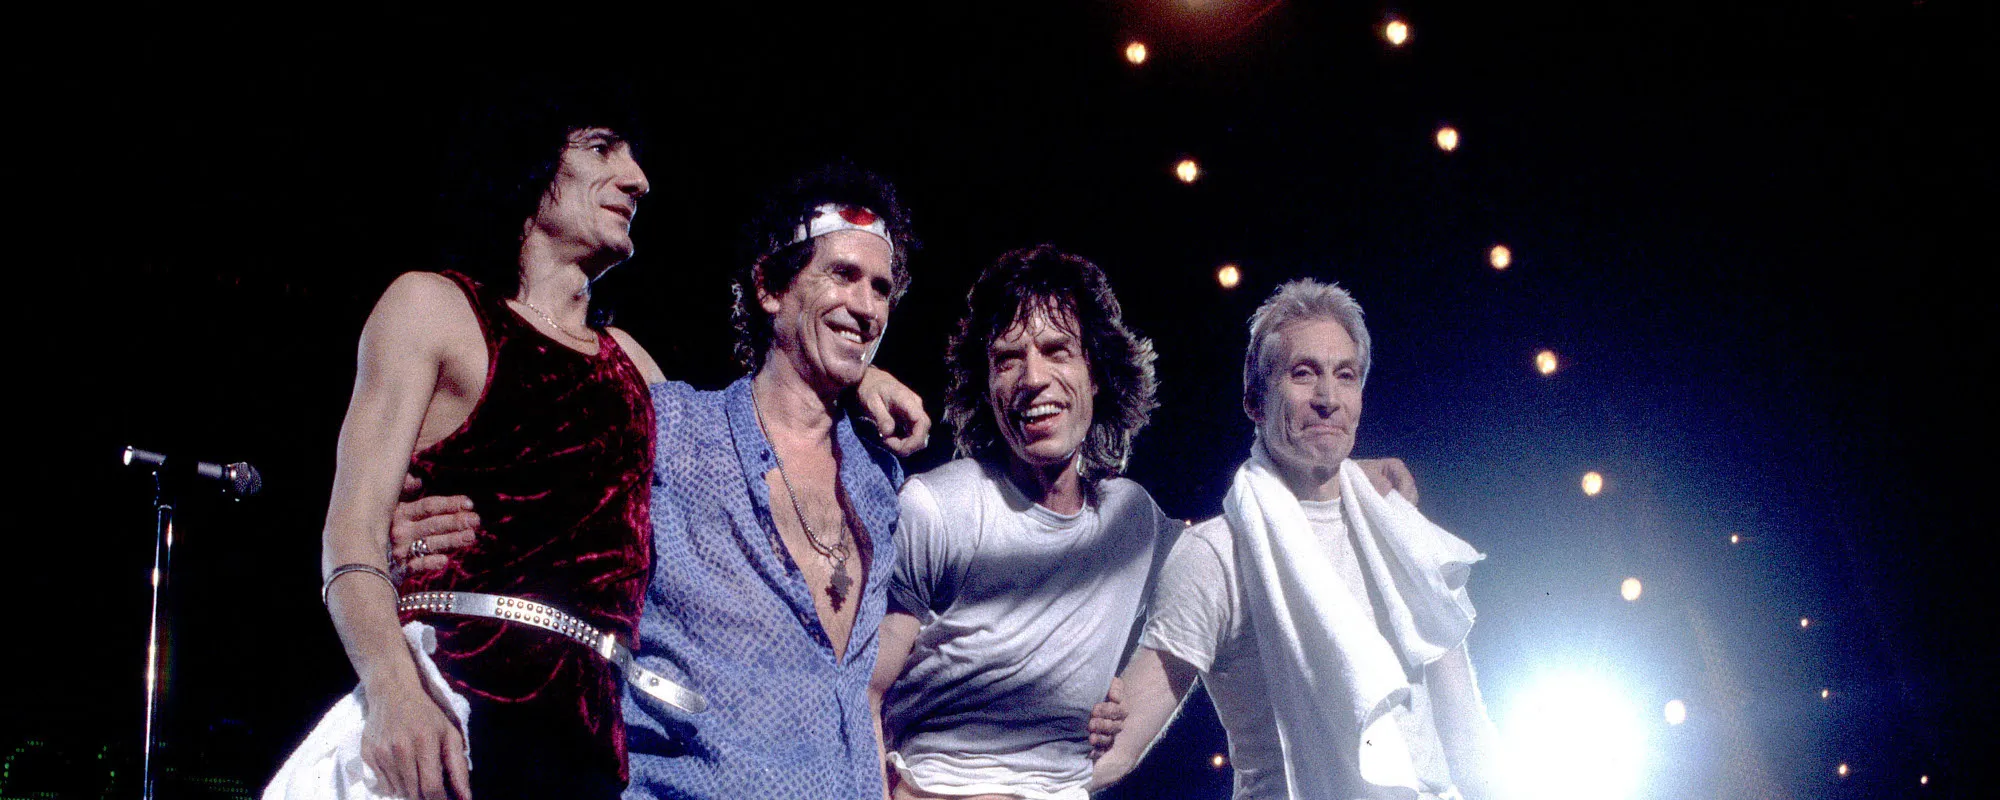 Then and Now: The Rolling Stones’ Enduring Rock Stardom